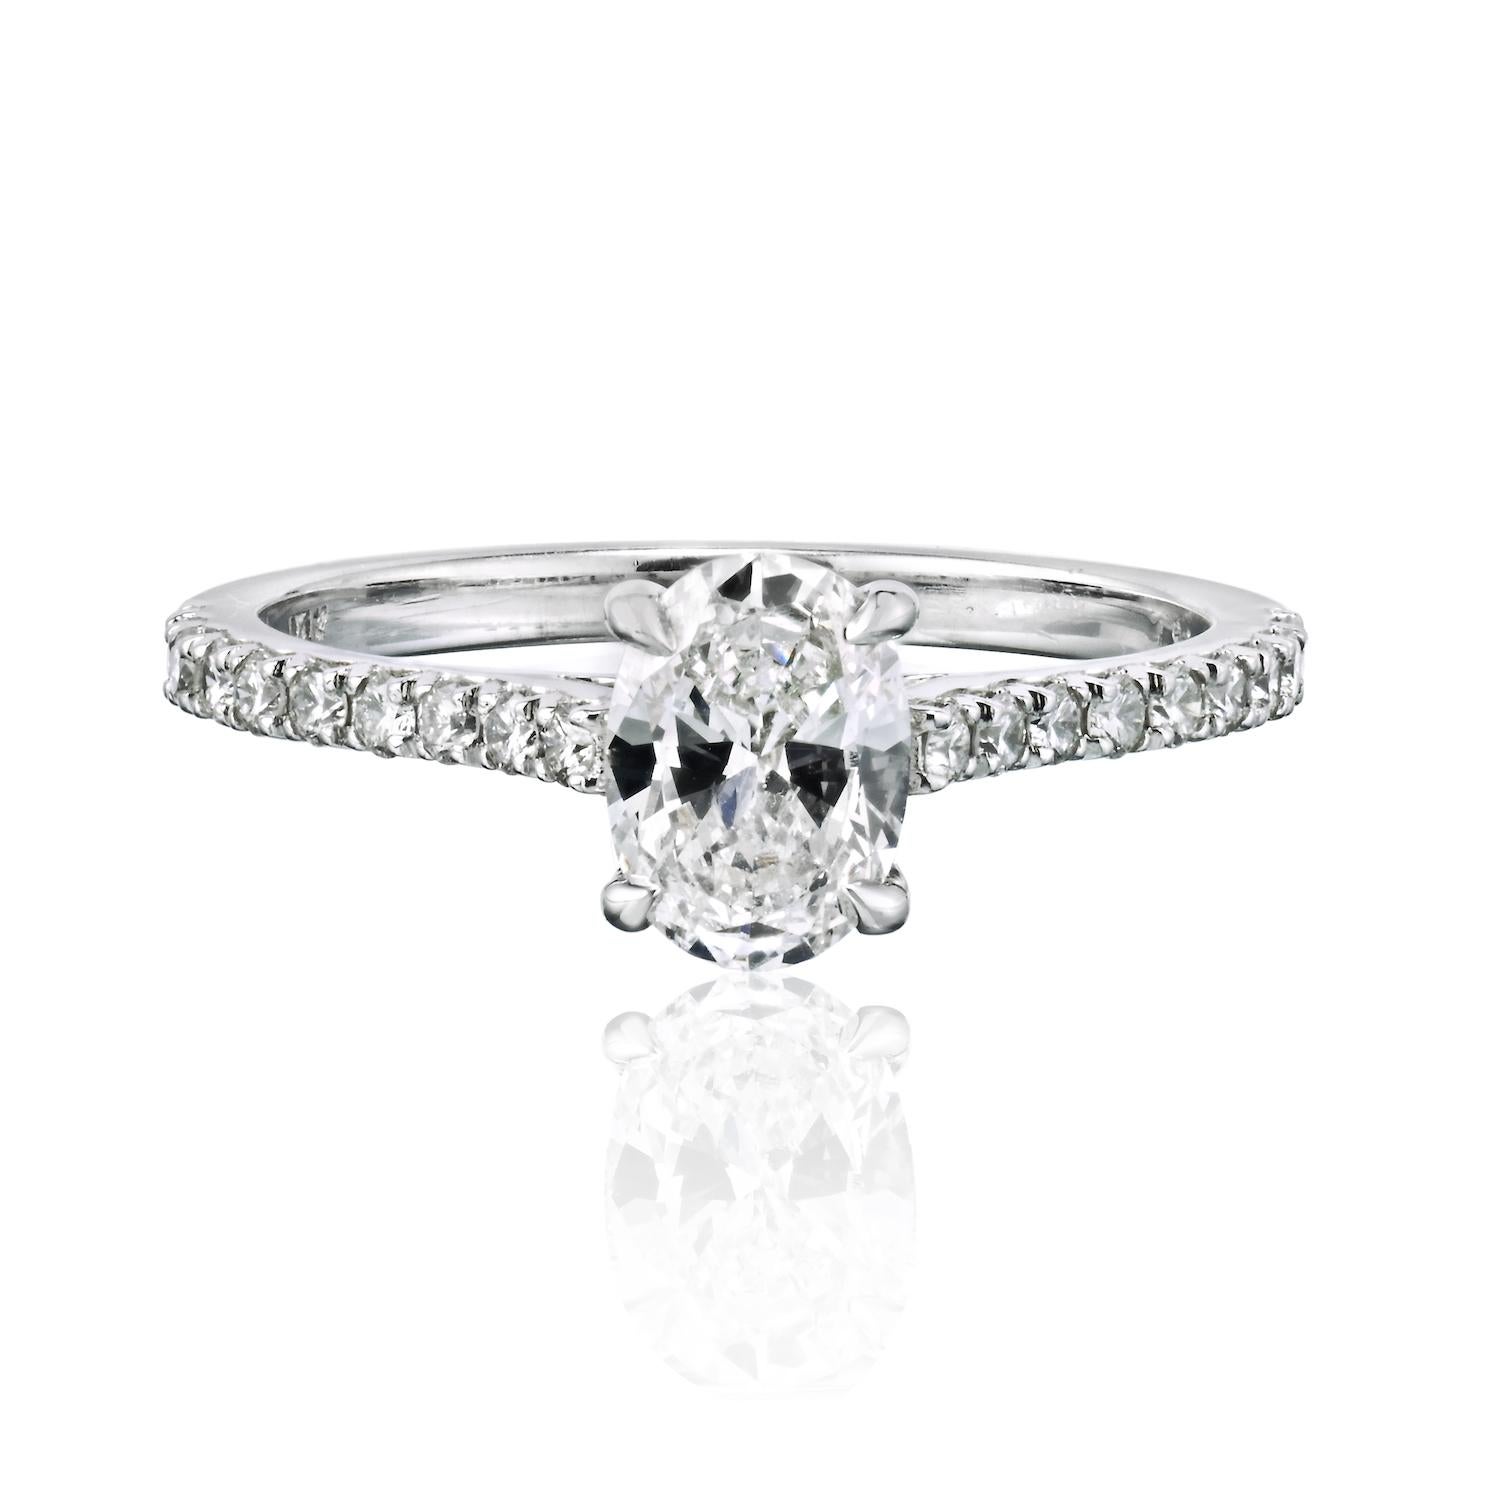 This lovely oval cut pave set diamond engagement ring features a 0.87-carat center diamond in a sparkly round brilliant diamond setting. 
Center diamond is GIA certified E color SI1 clarity, pave diamonds are of 0.27cts and are of similar quality.